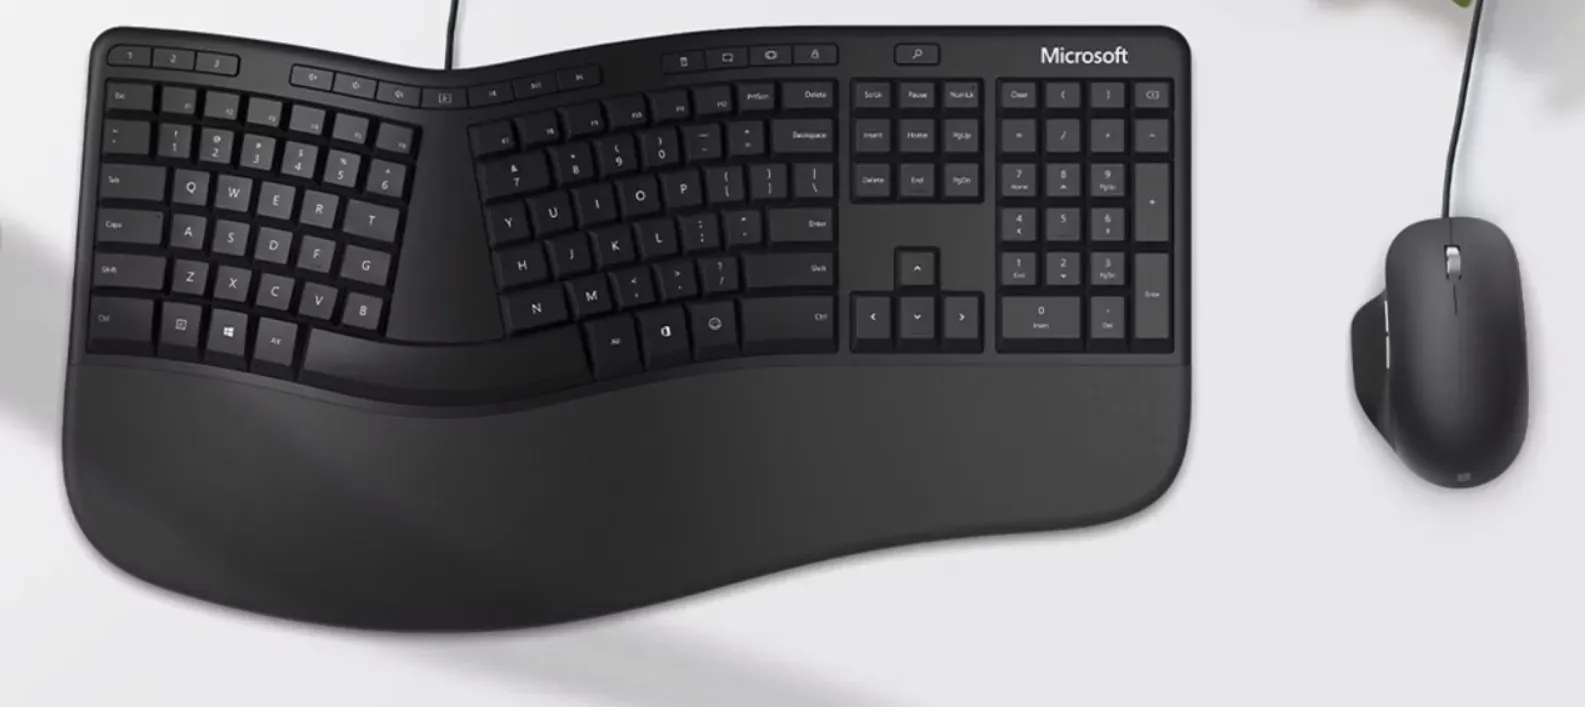 Microsoft's Ergonomic Keyboard and Mouse could be on the chopping block as the company refocuses on Surface-branded accessories.